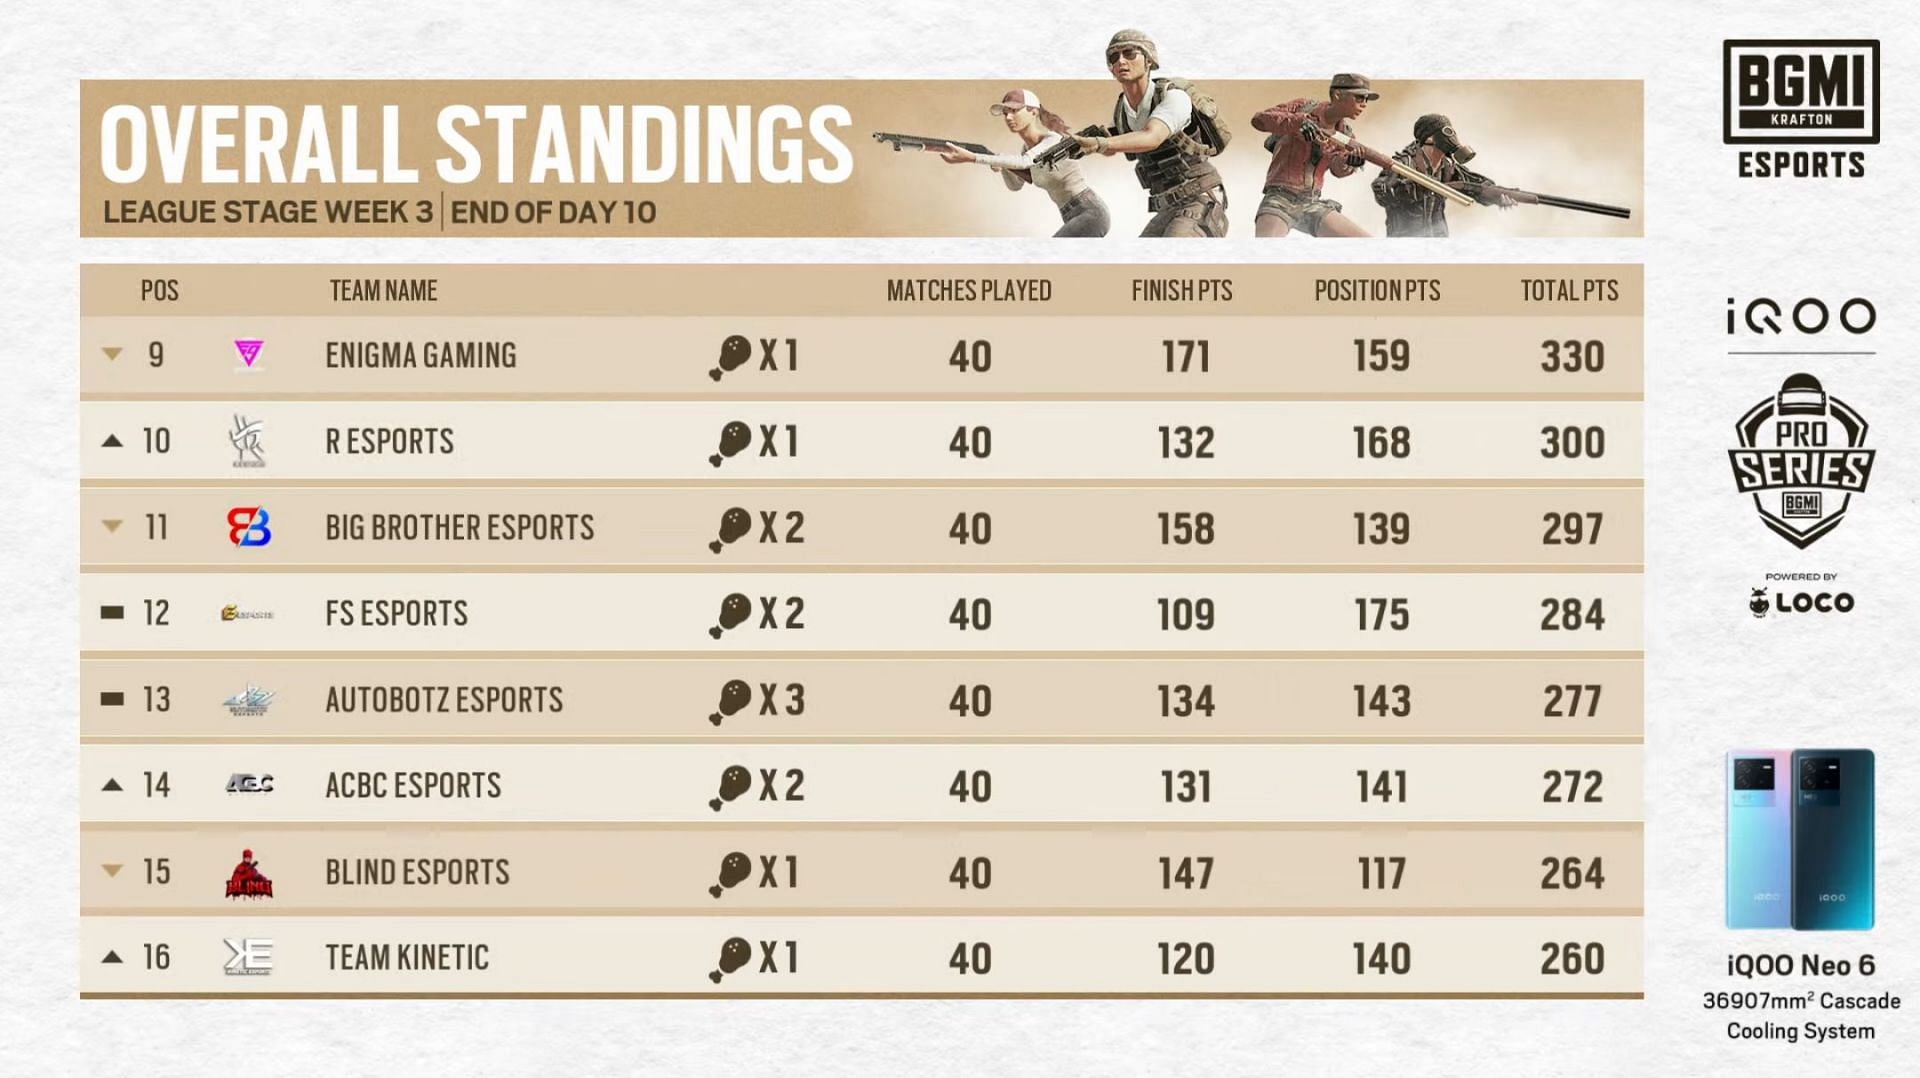 R Esports collected 300 points in 40 matches (Image via BGMI)